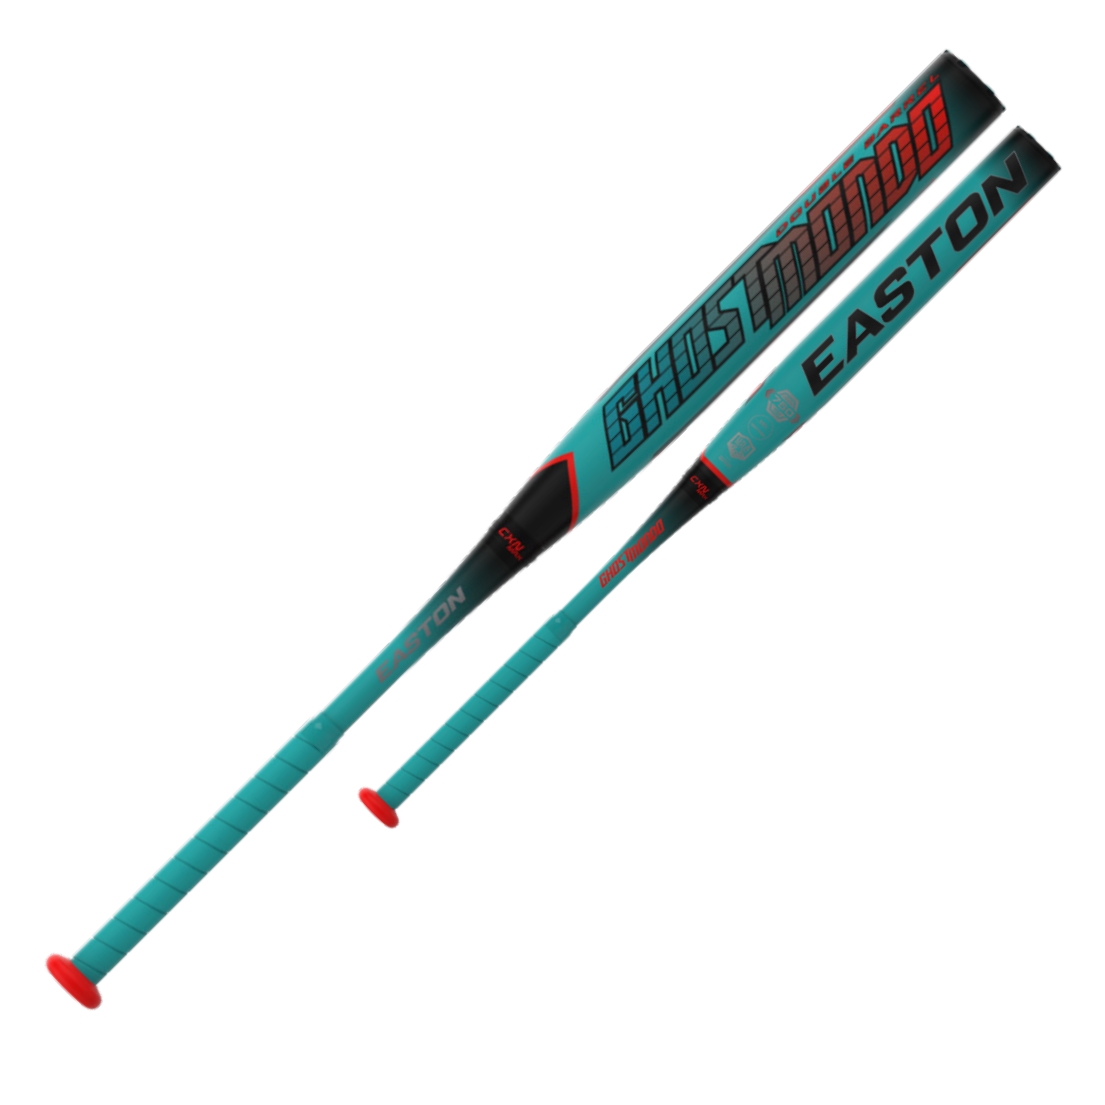 easton-ghostmondo-ext-12-5-load-usa-softball-bat-34-inch-26-oz SP22GHML-3426 Easton 628412361566 Double Barrel Technology – Delivers soft barrel compression and hot performance